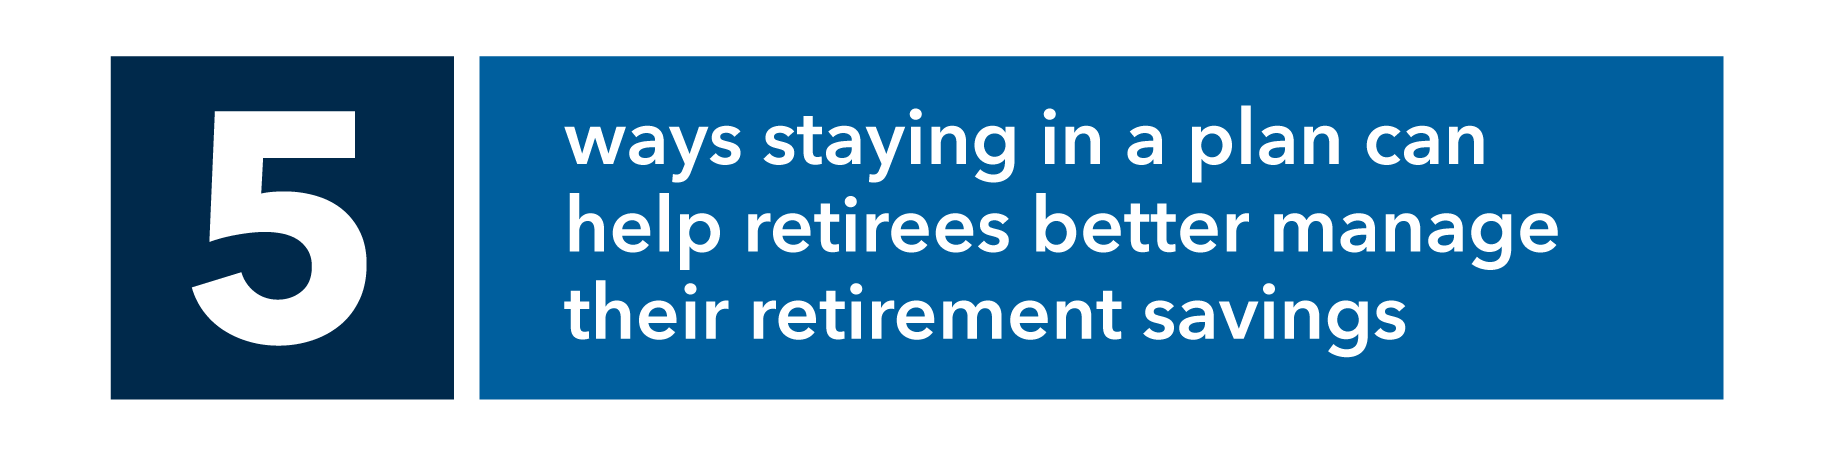 5 ways staying in a plan can help retirees better manage their retirement savings